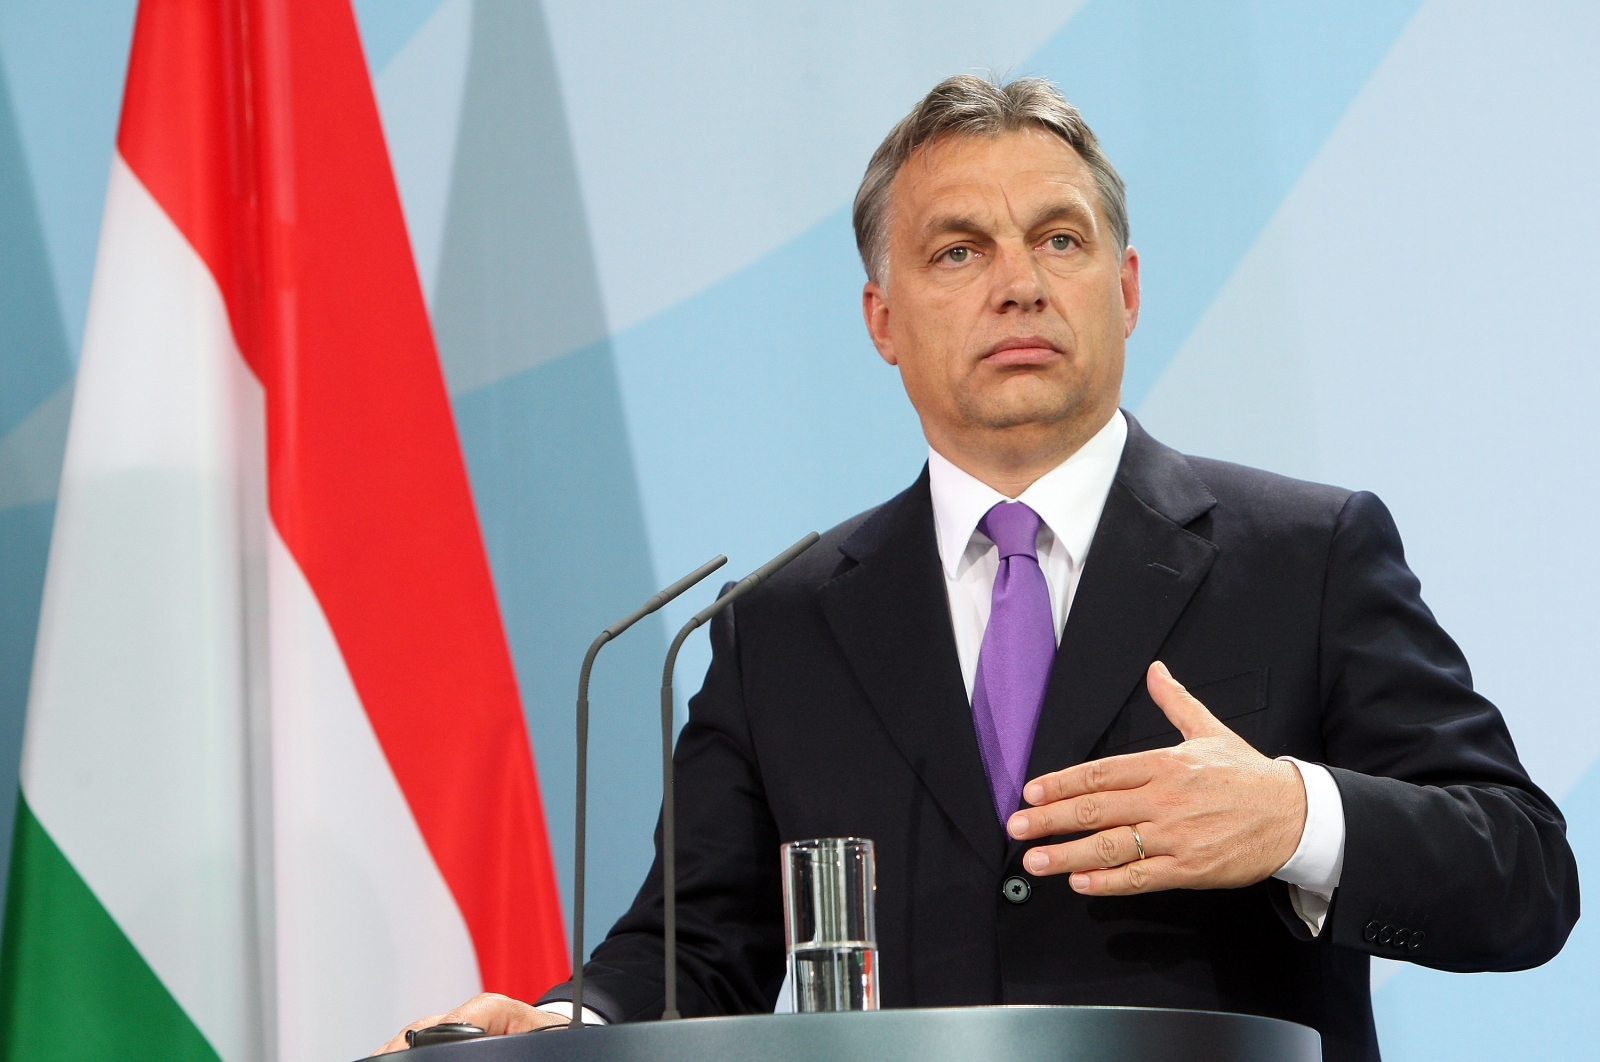 Hungary Rolling Out Legislation That Will Hurt Foreign Universities In The Country